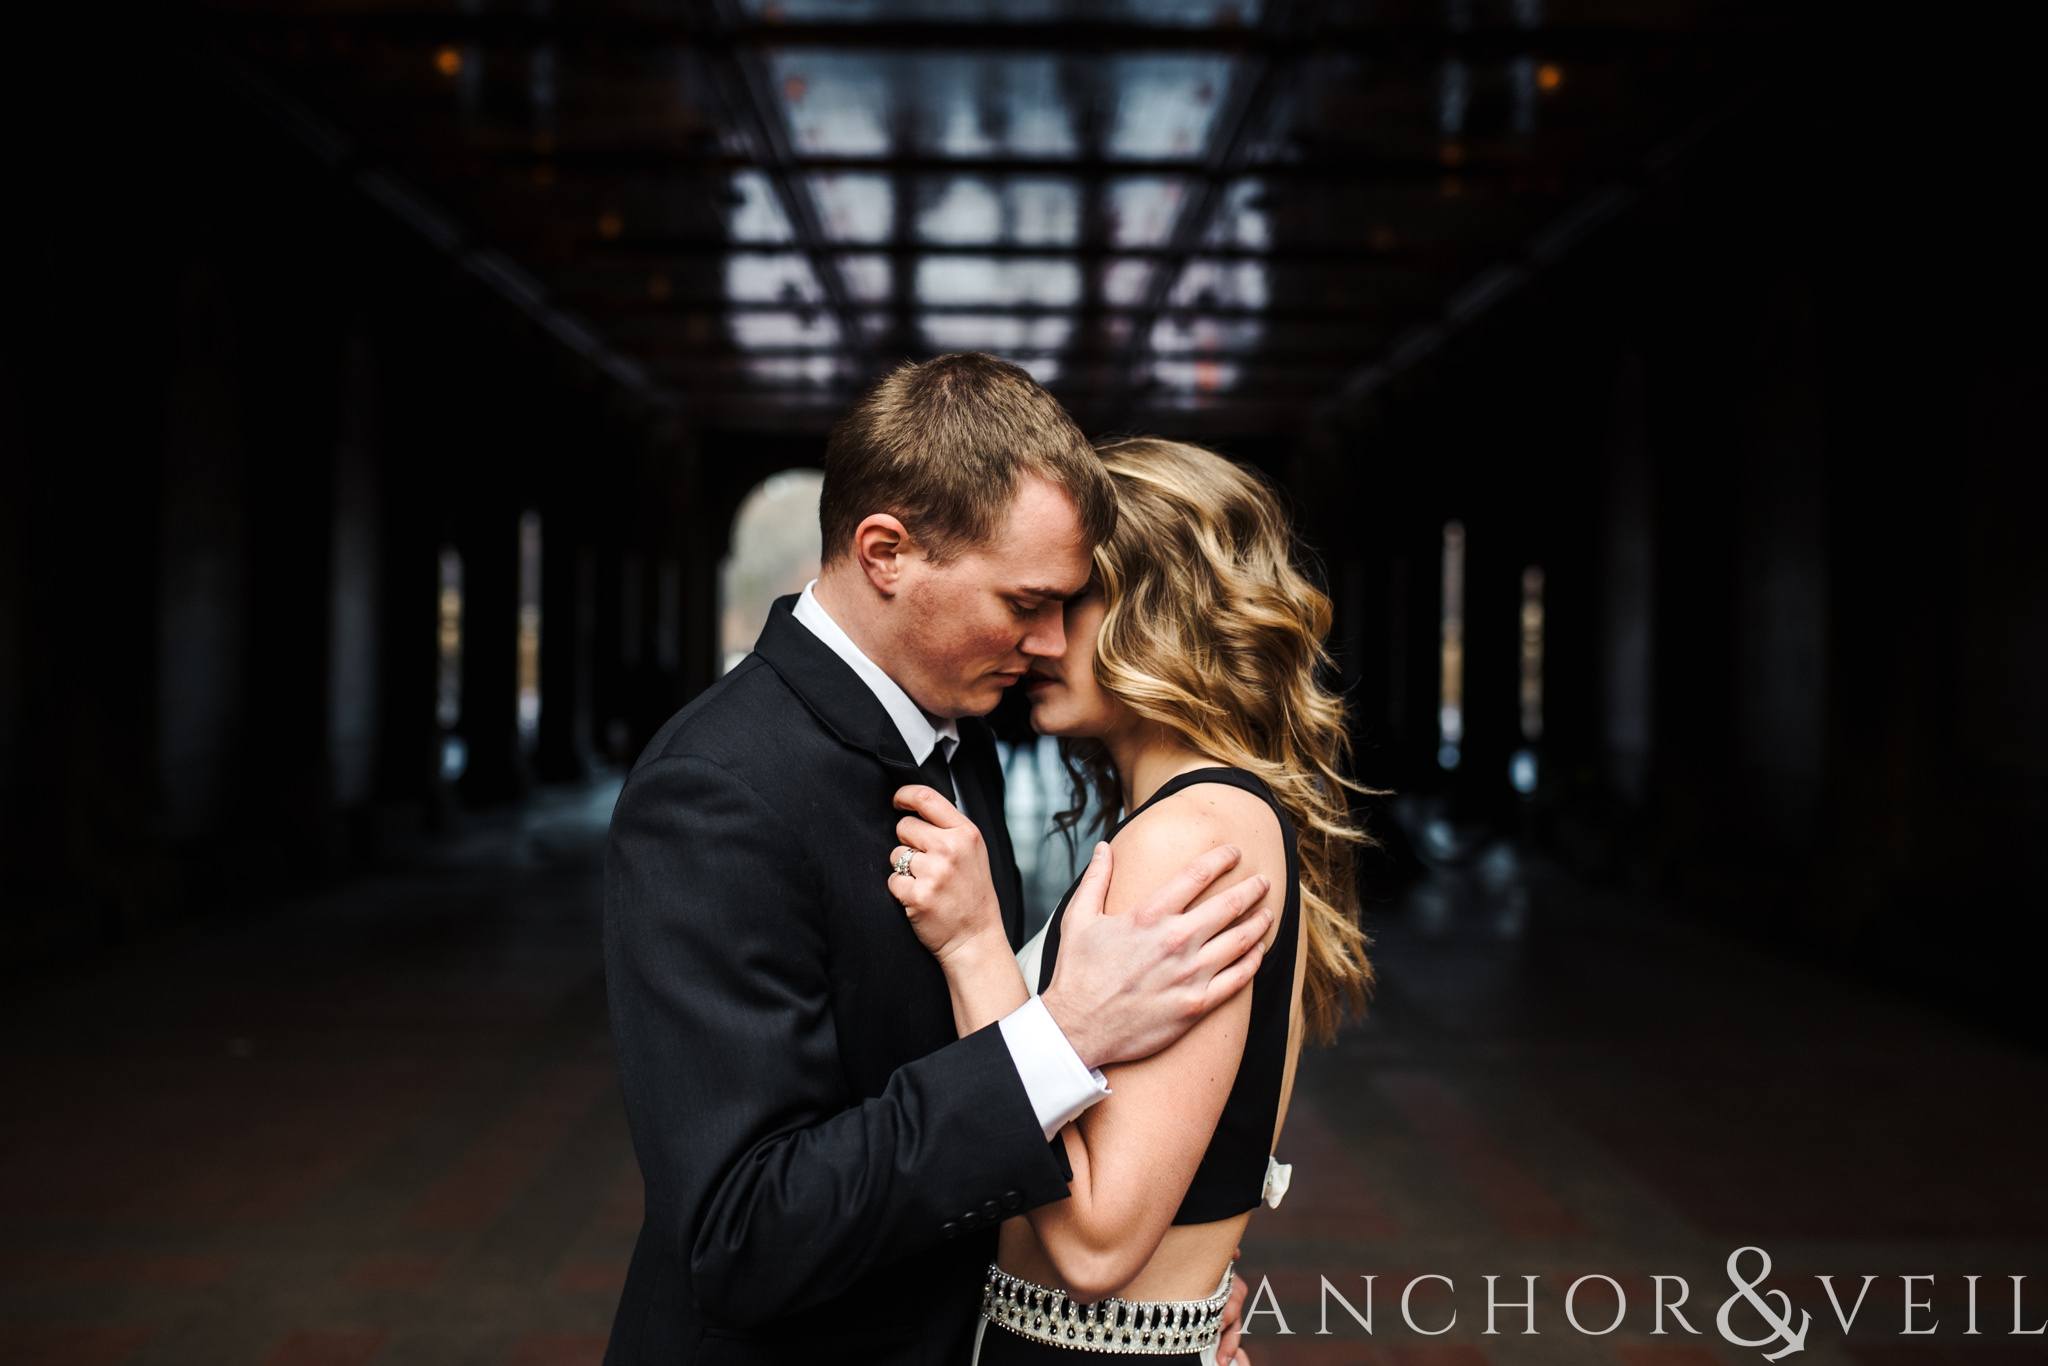 Getting close in light during their anniversary session